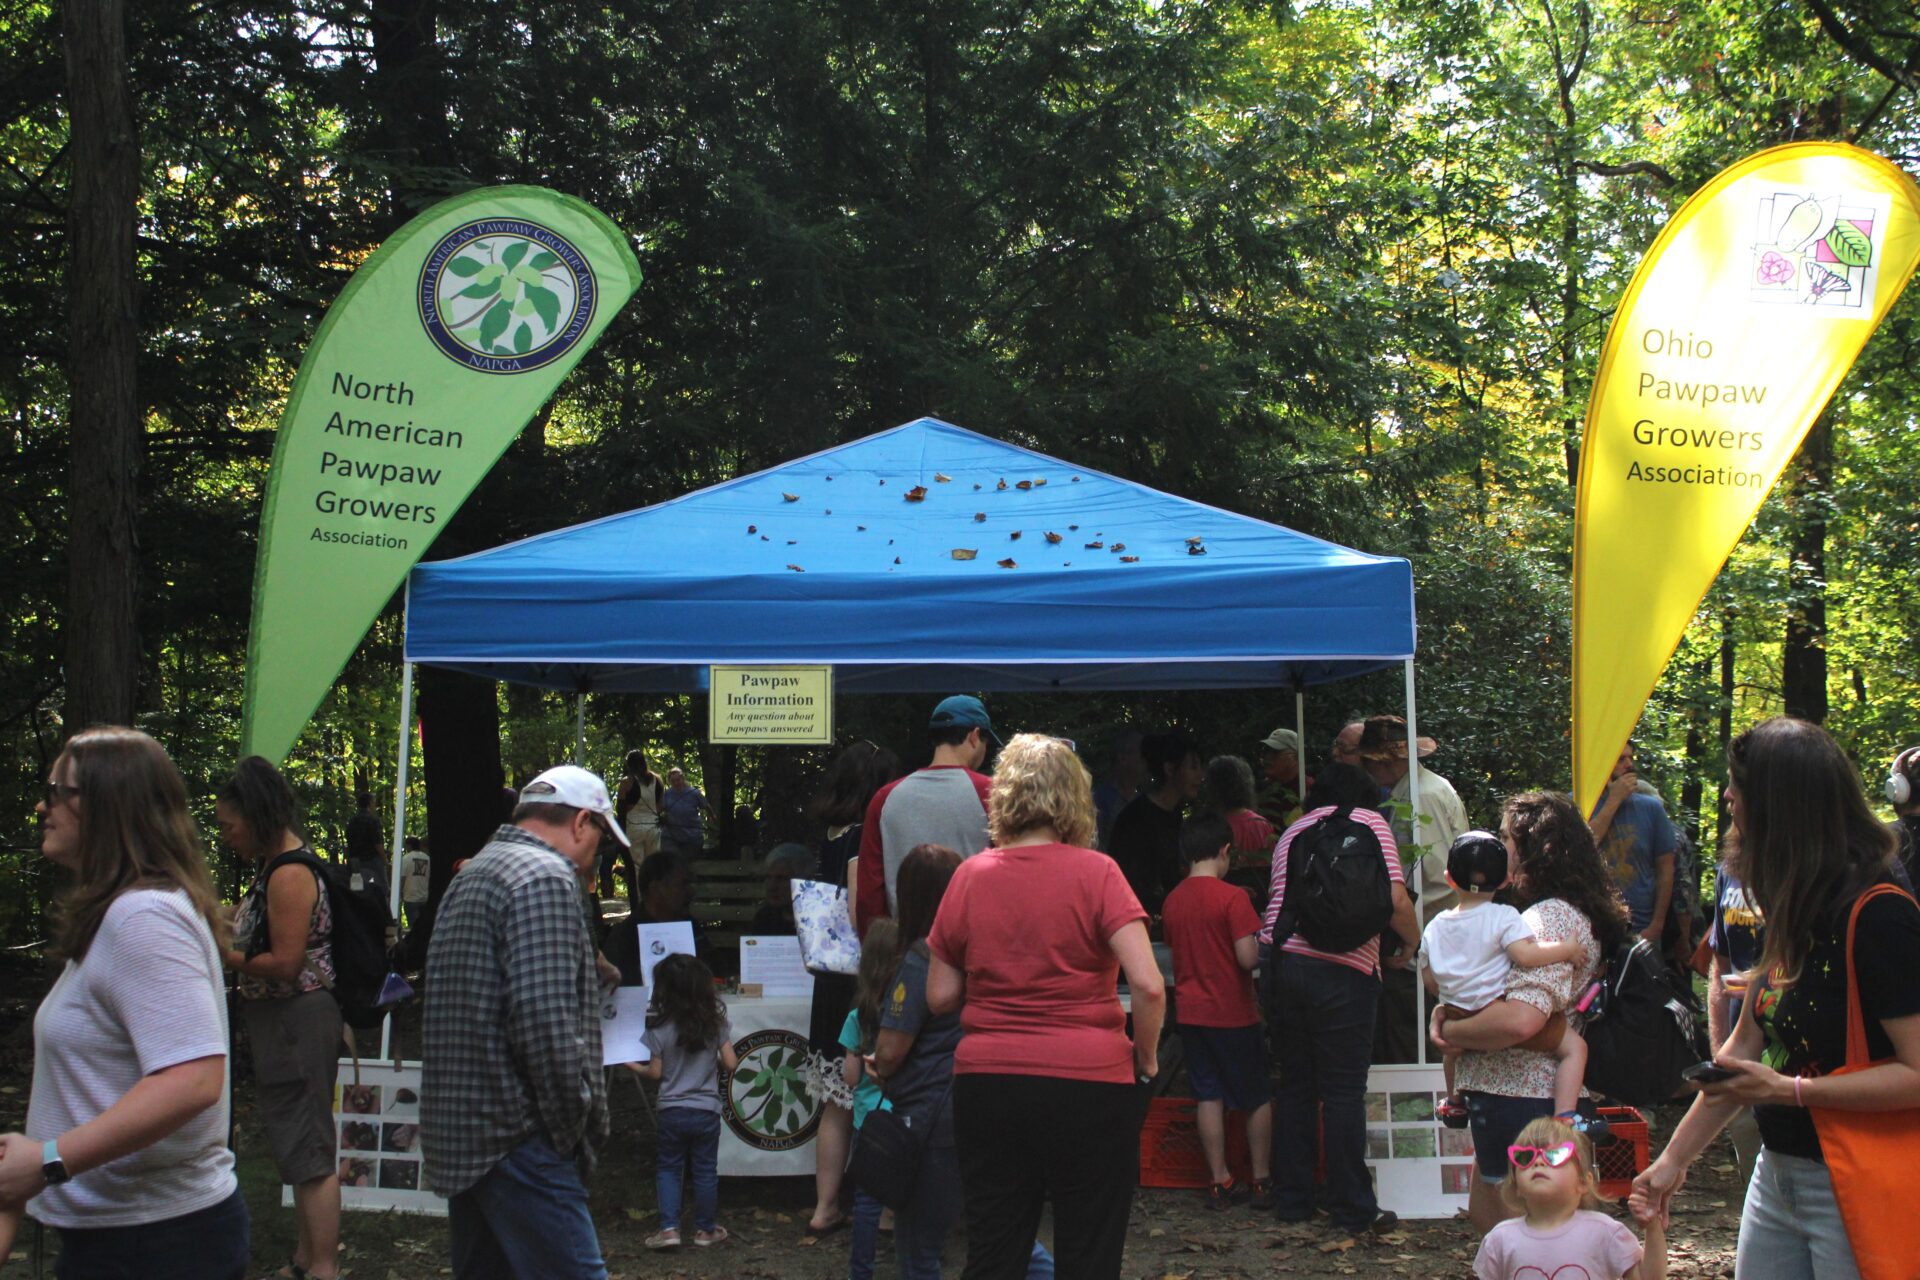 The crowd at the 2023 WVU PawPaw Festival walk in front of a blue tent awning stands between two teardrop signs in a forest glade. The sign on the left is green and reads "North American PawPaw Growers" while the sign on the right is yellow and reads "Ohio PawPaw Growers Association", backlit by sun. A smaller sign hanging from the tent awning reads "PawPaw Information"